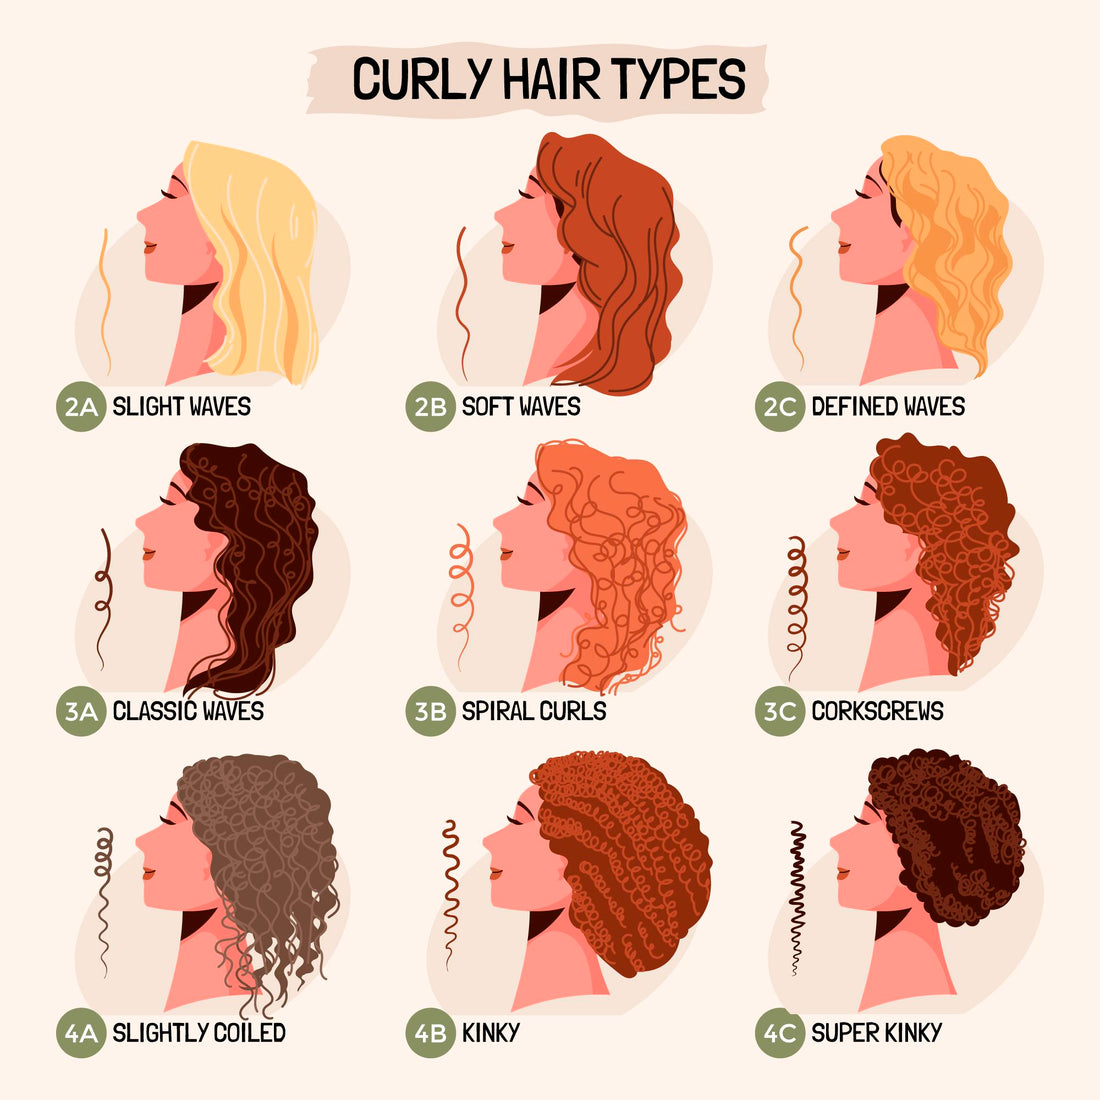 How to Identify and Style Your Hair Type